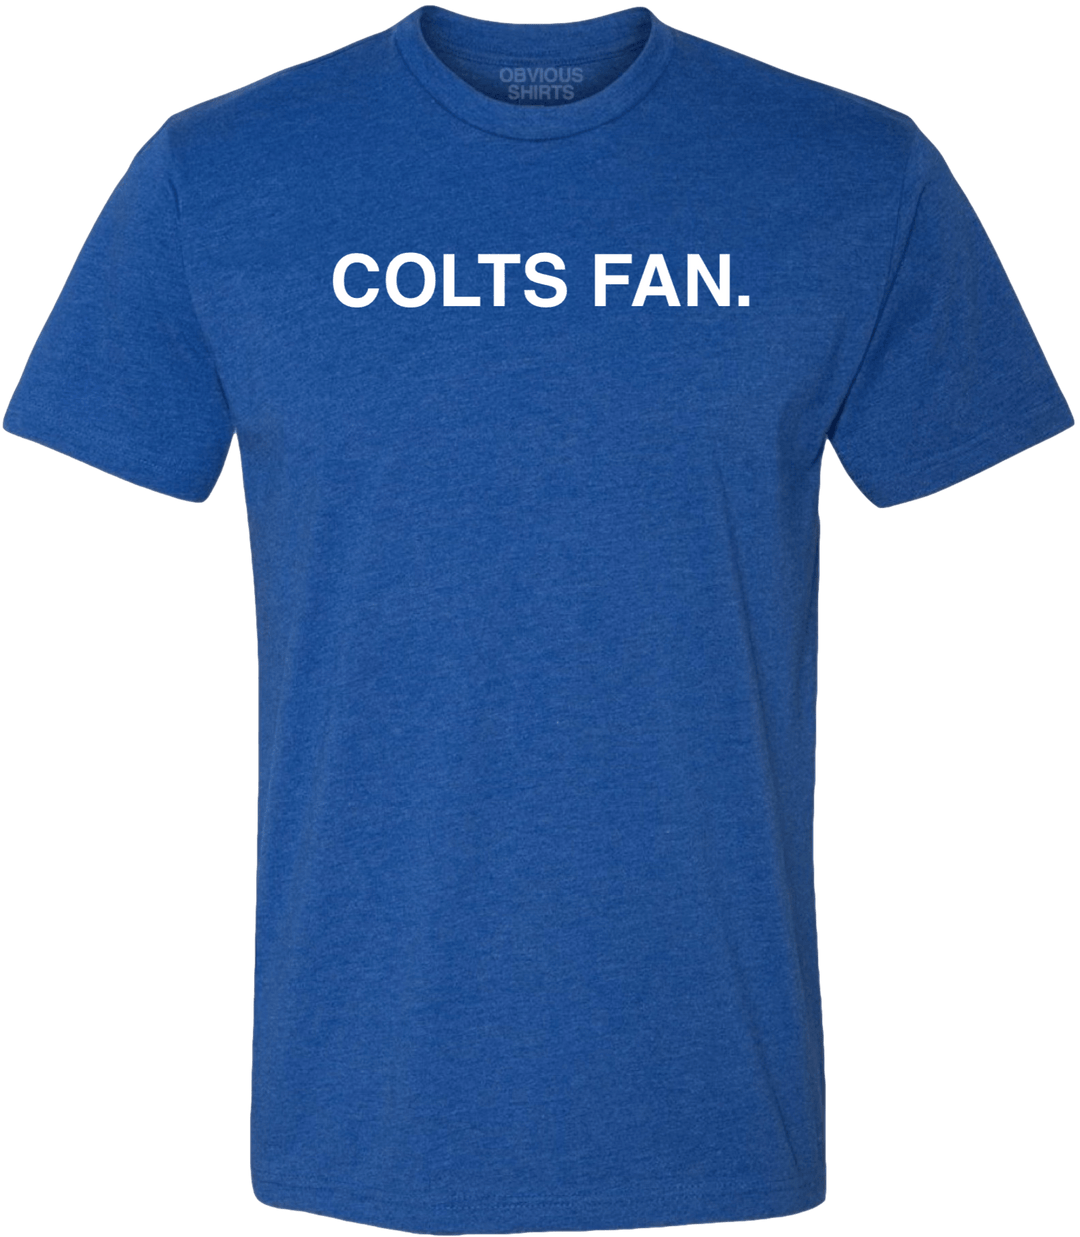 COLTS FAN. - OBVIOUS SHIRTS